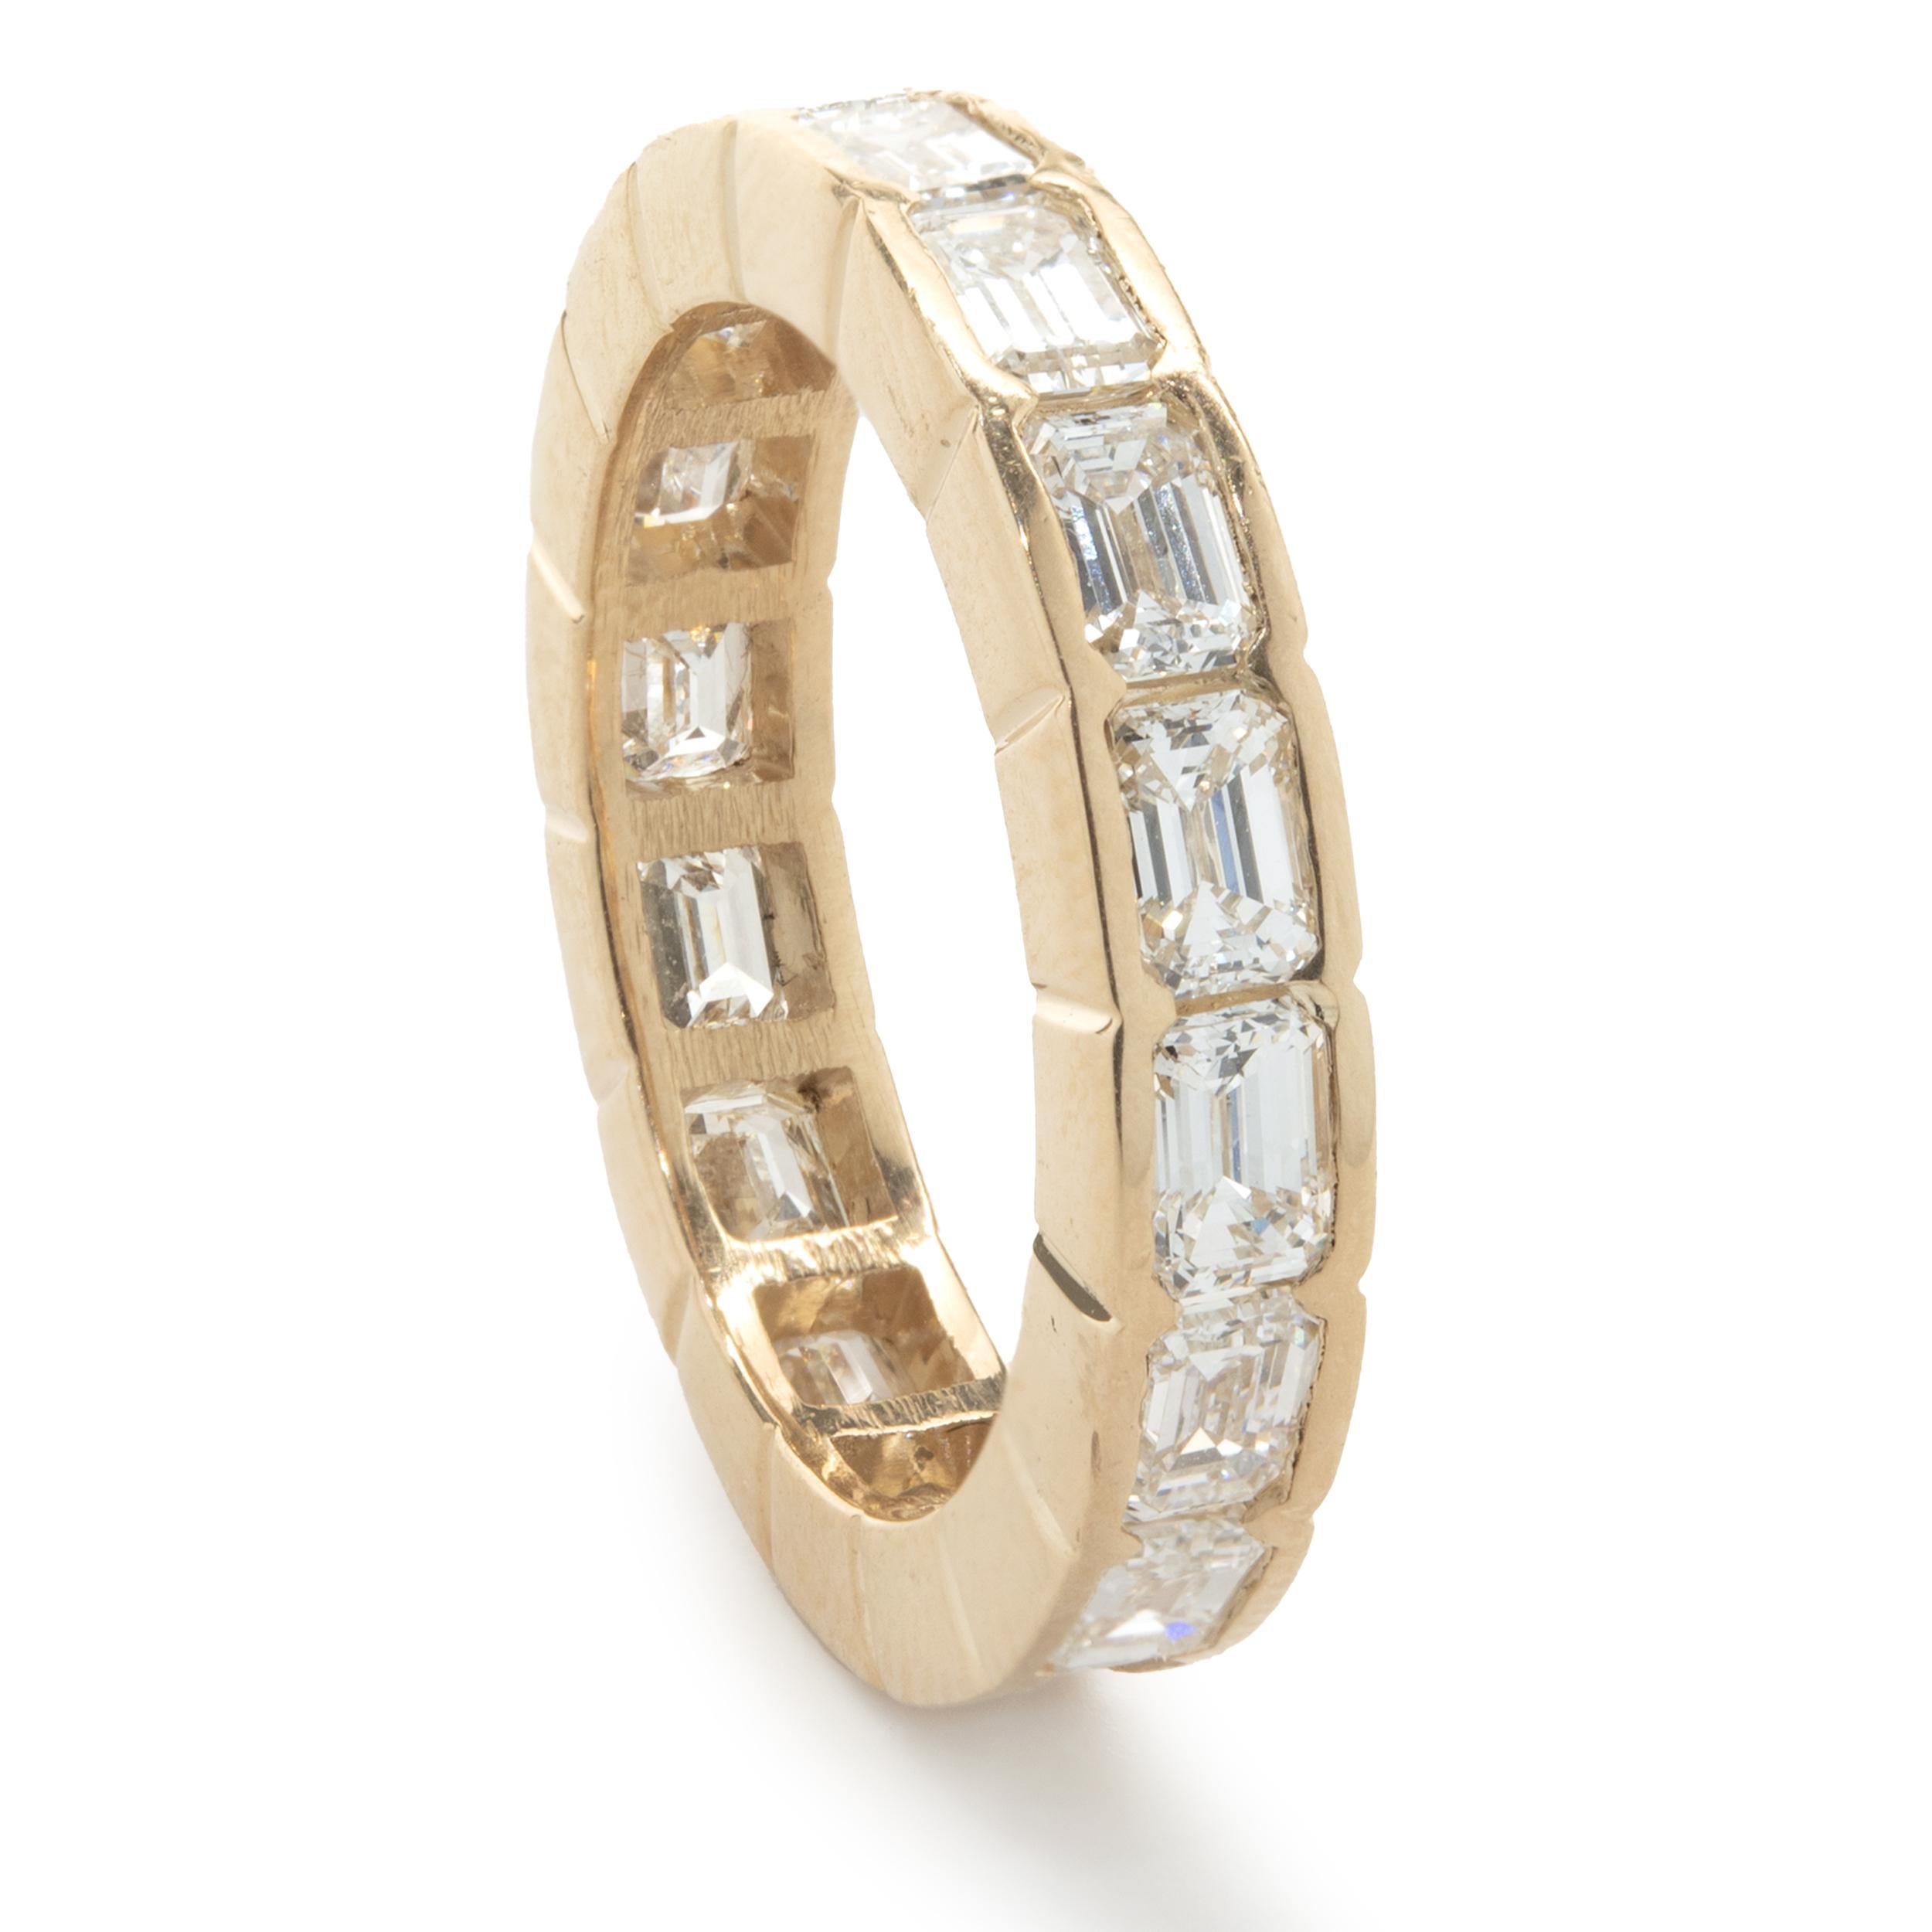 Designer: Custom
Material: 14K yellow gold
Diamonds: 17 emerald cut = 3.25cttw
Color: G
Clarity: VS1
Size: 5.5 (complimentary sizing available)
Dimensions: ring measures 4.90mm in width
Weight: 3.42 grams
